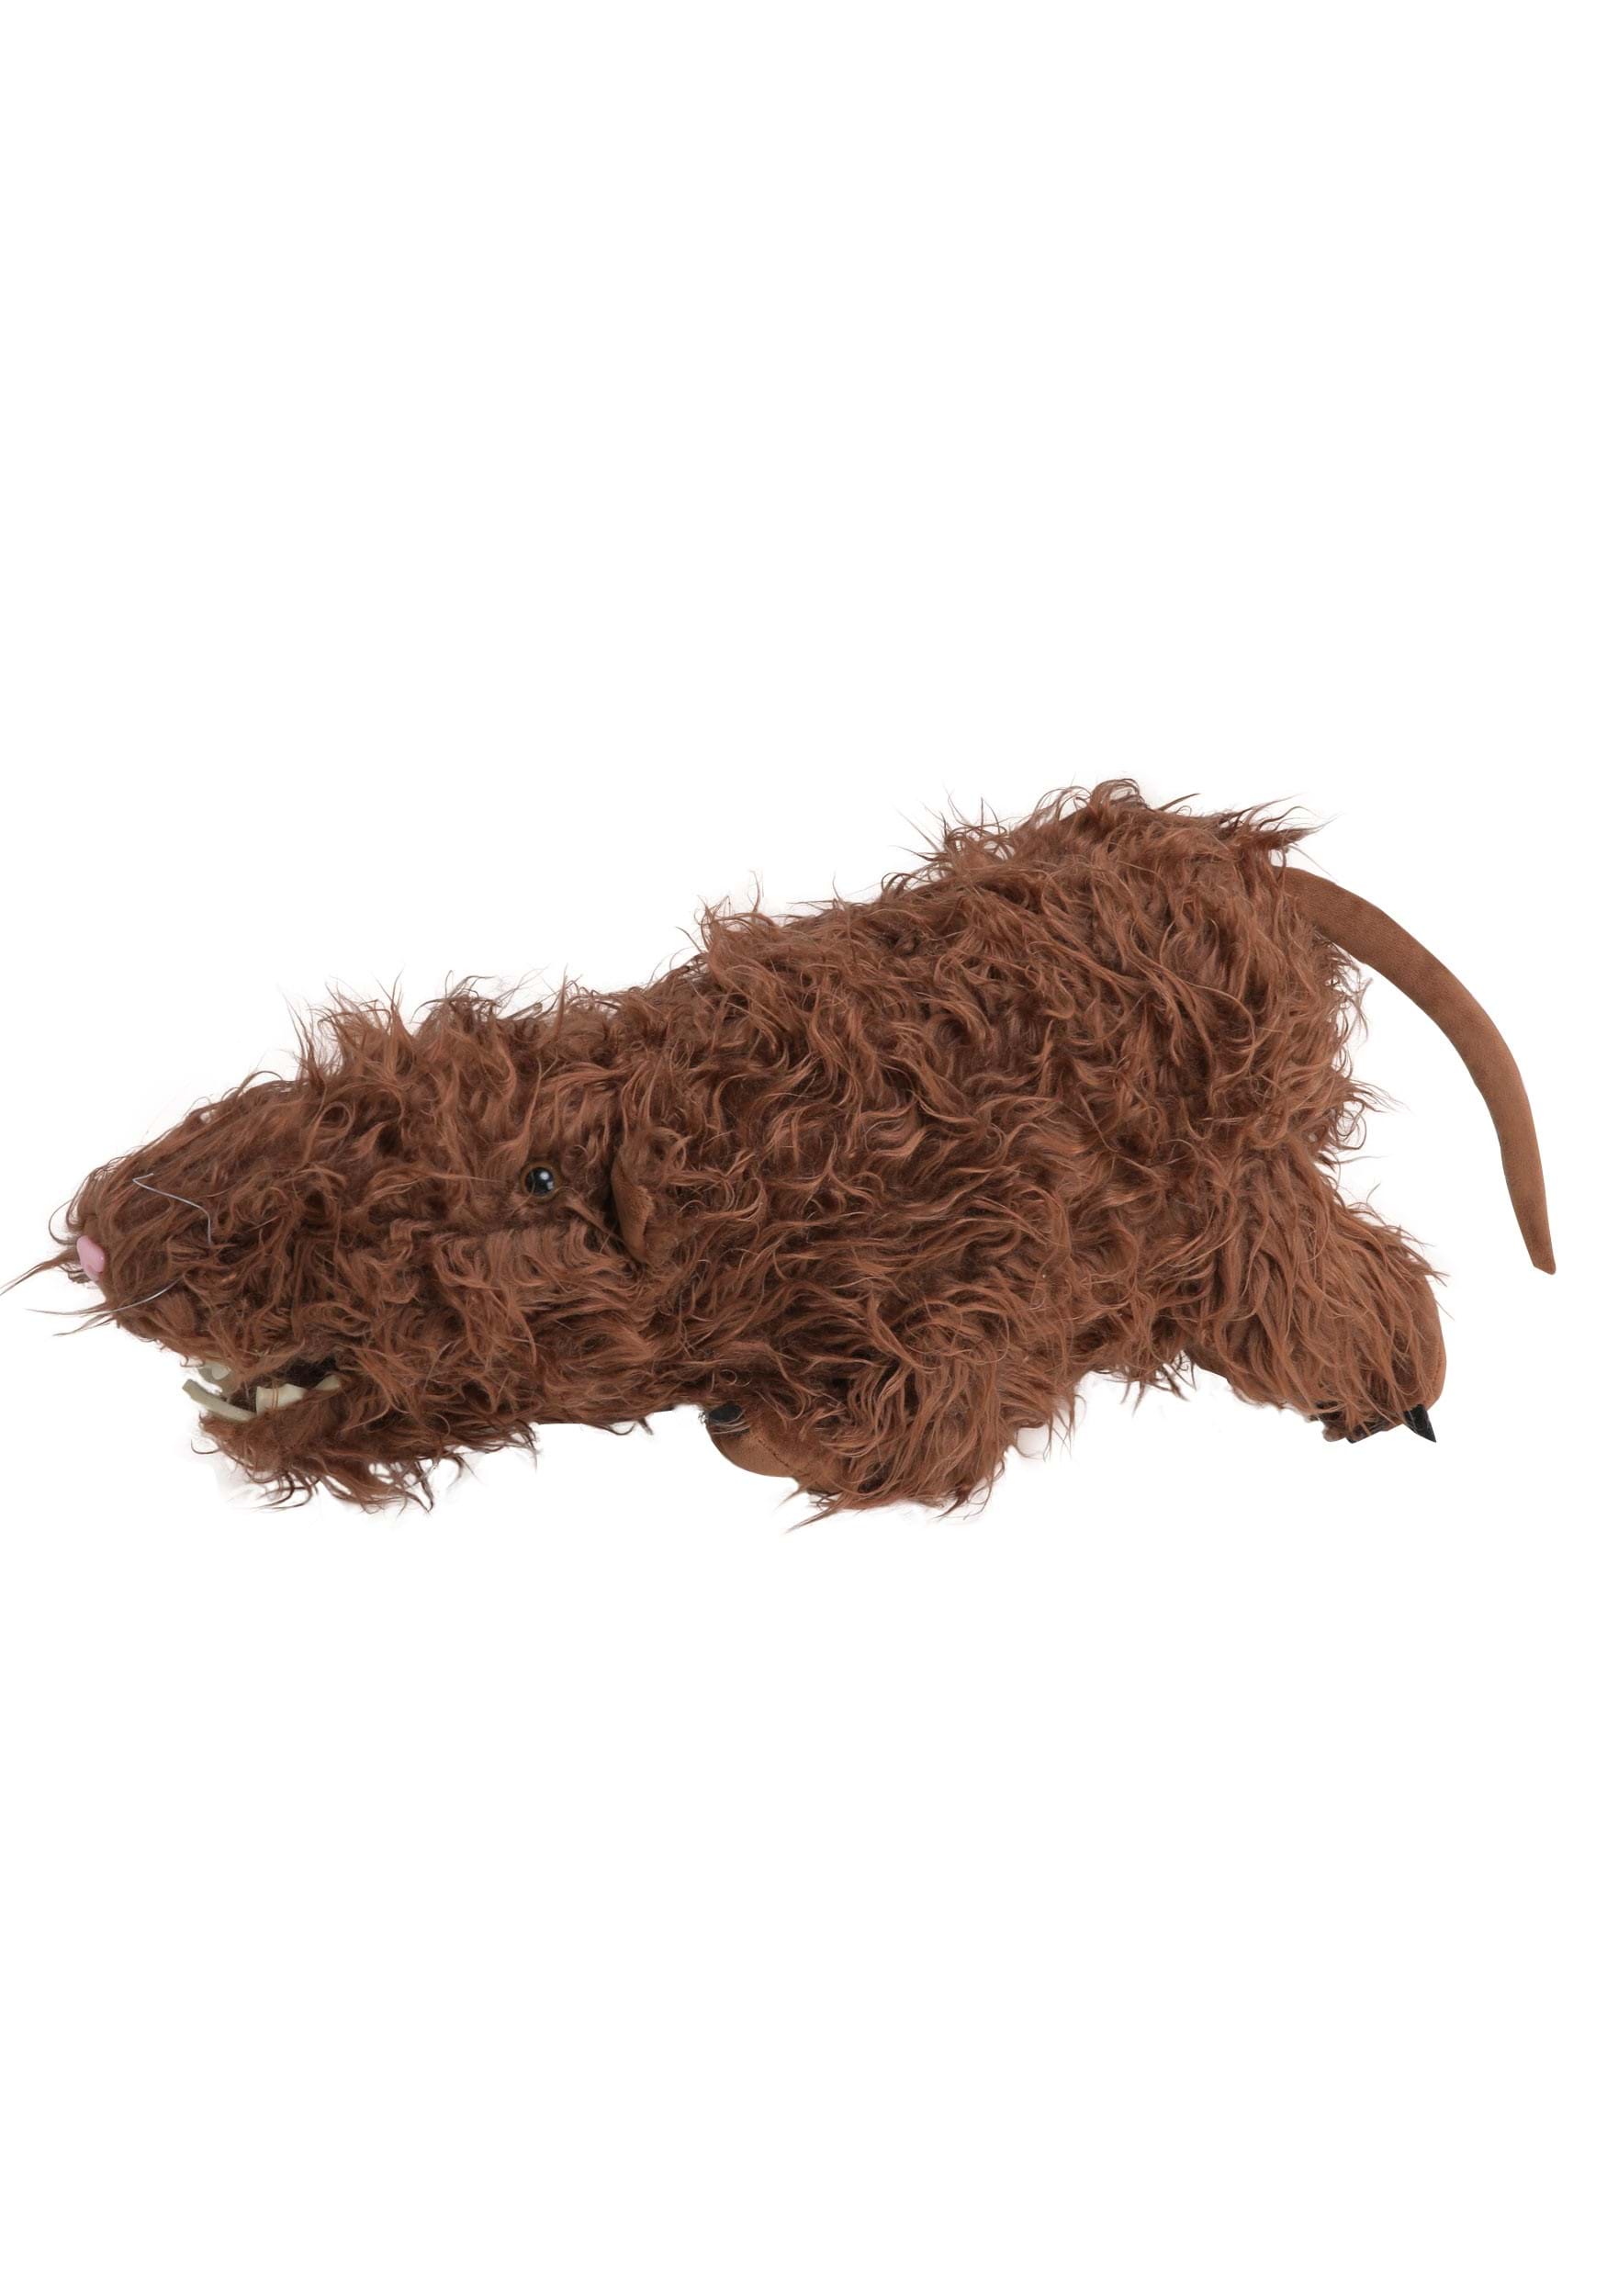 Rodent of Unusual Size Plush from The Princess Bride